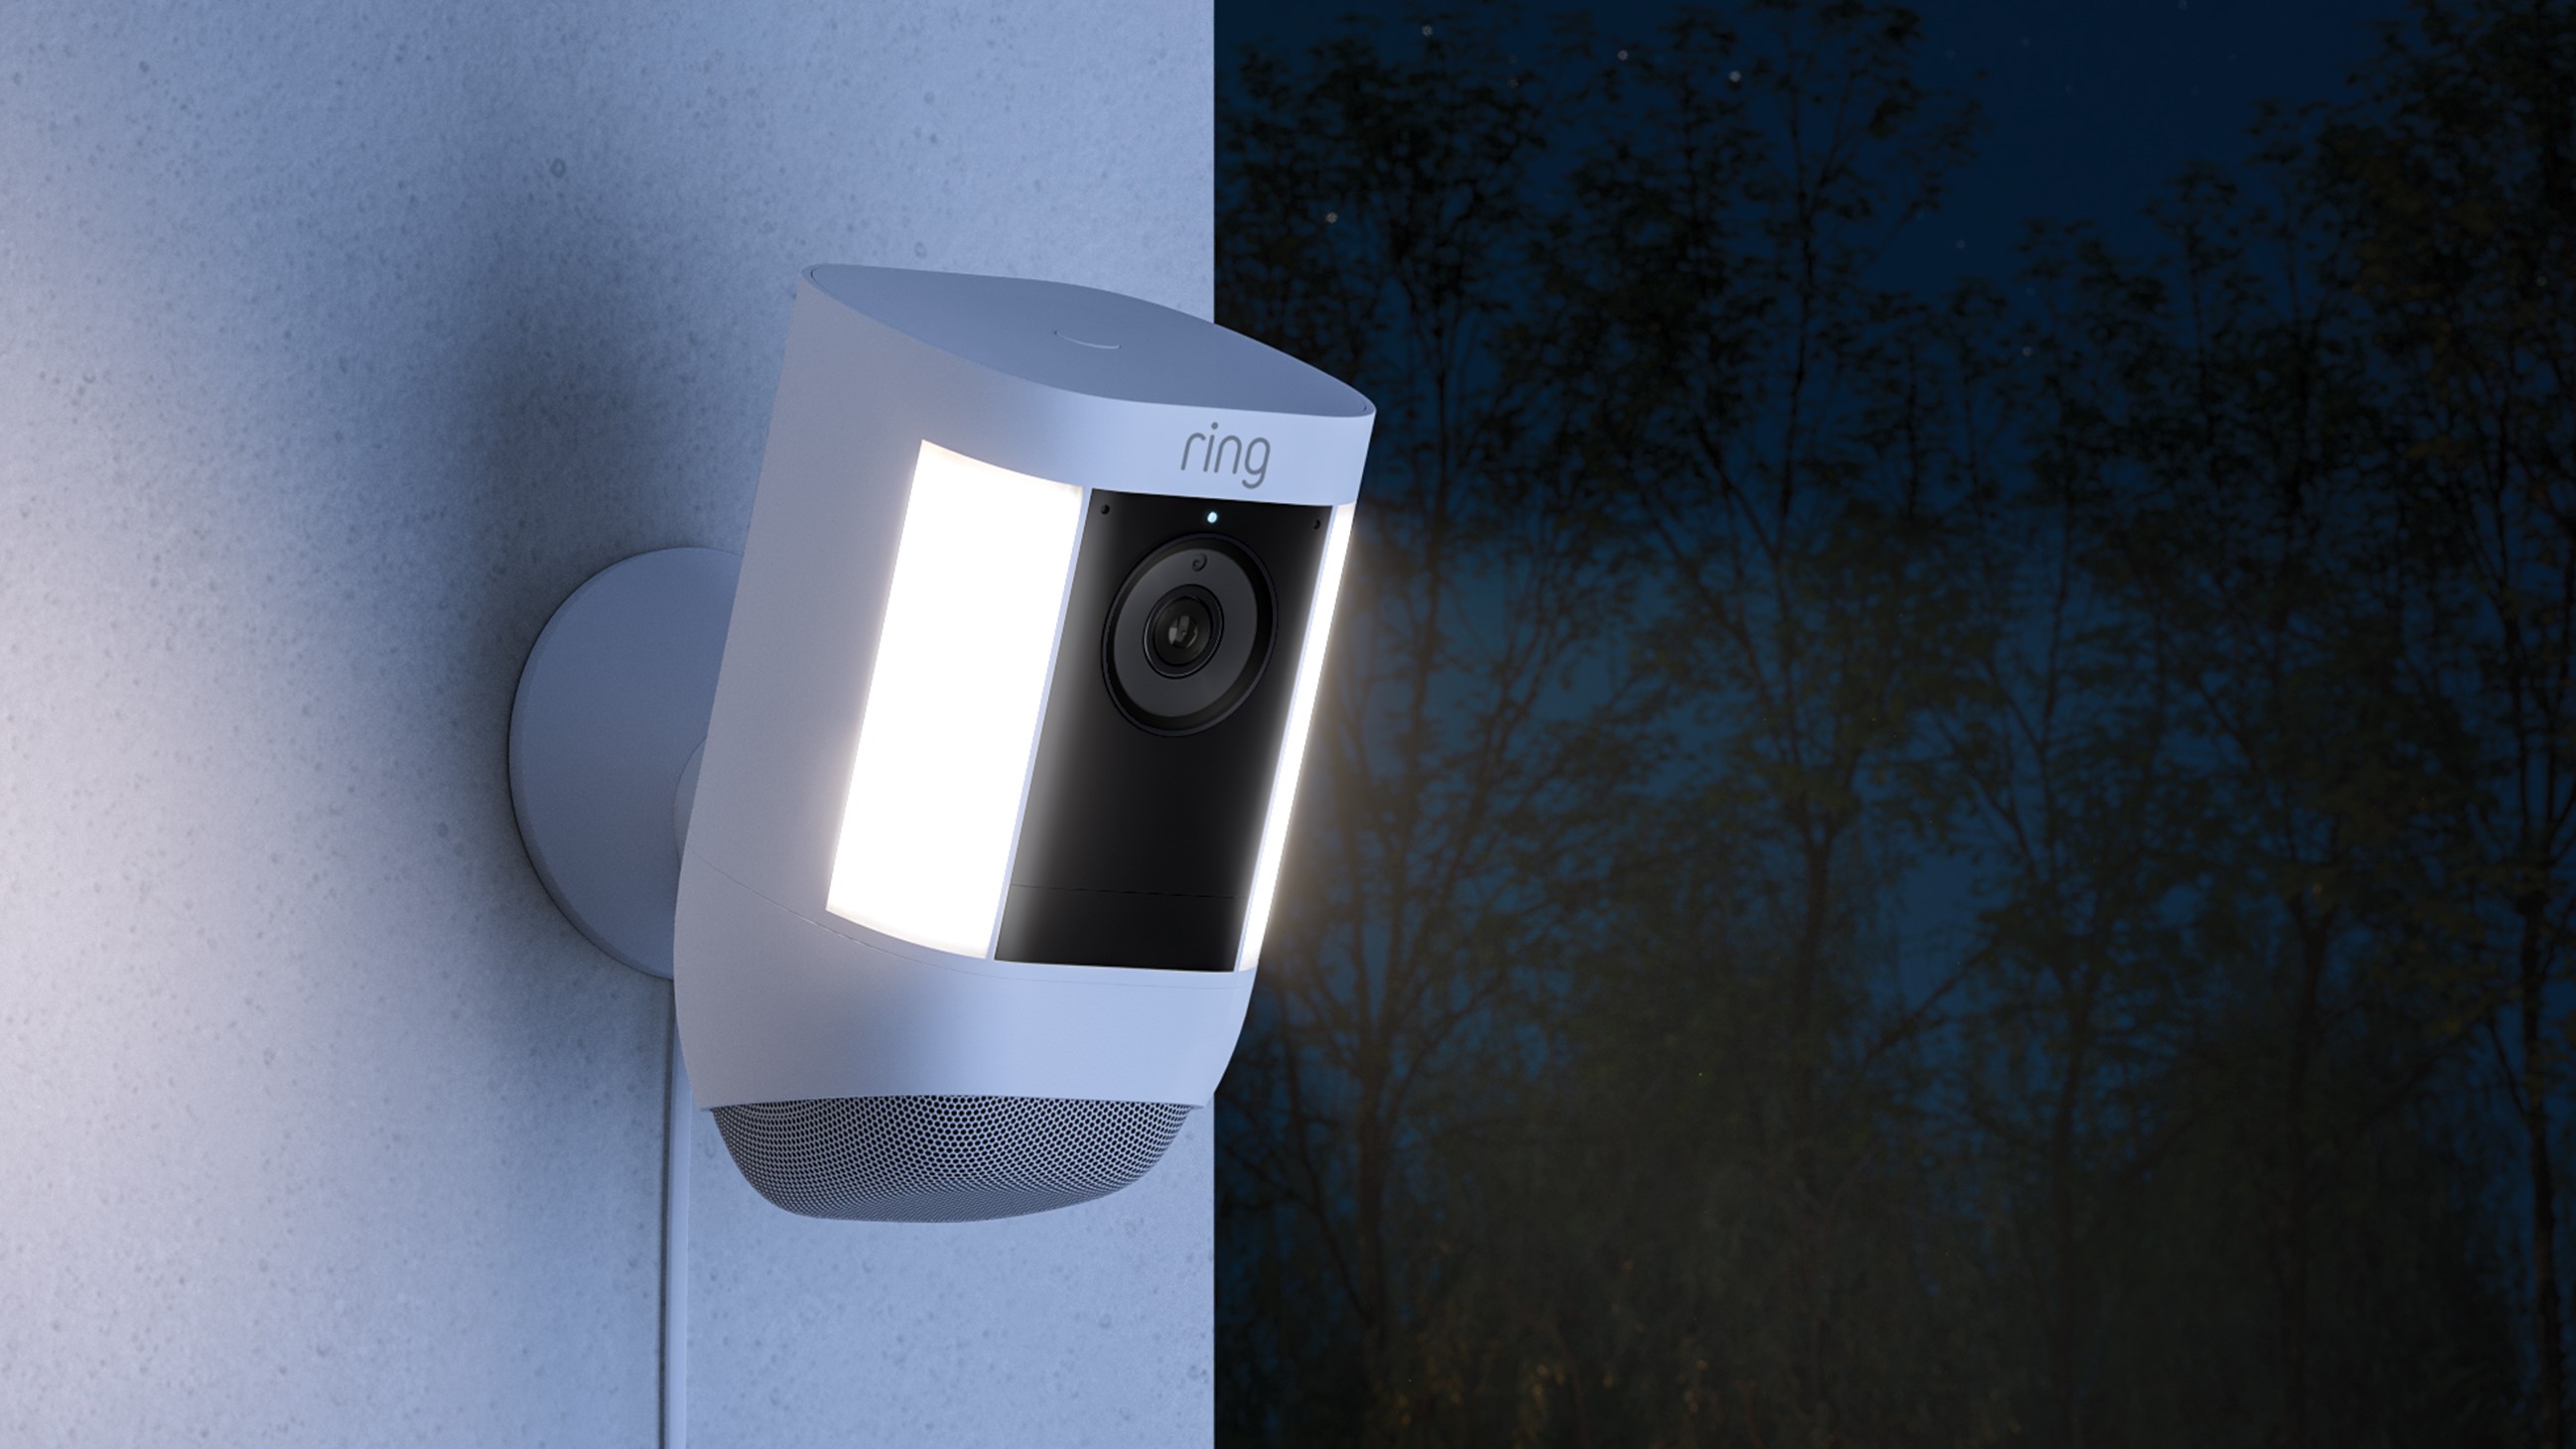 Spotlight Cam Pro at night with its powerful light and speaker.